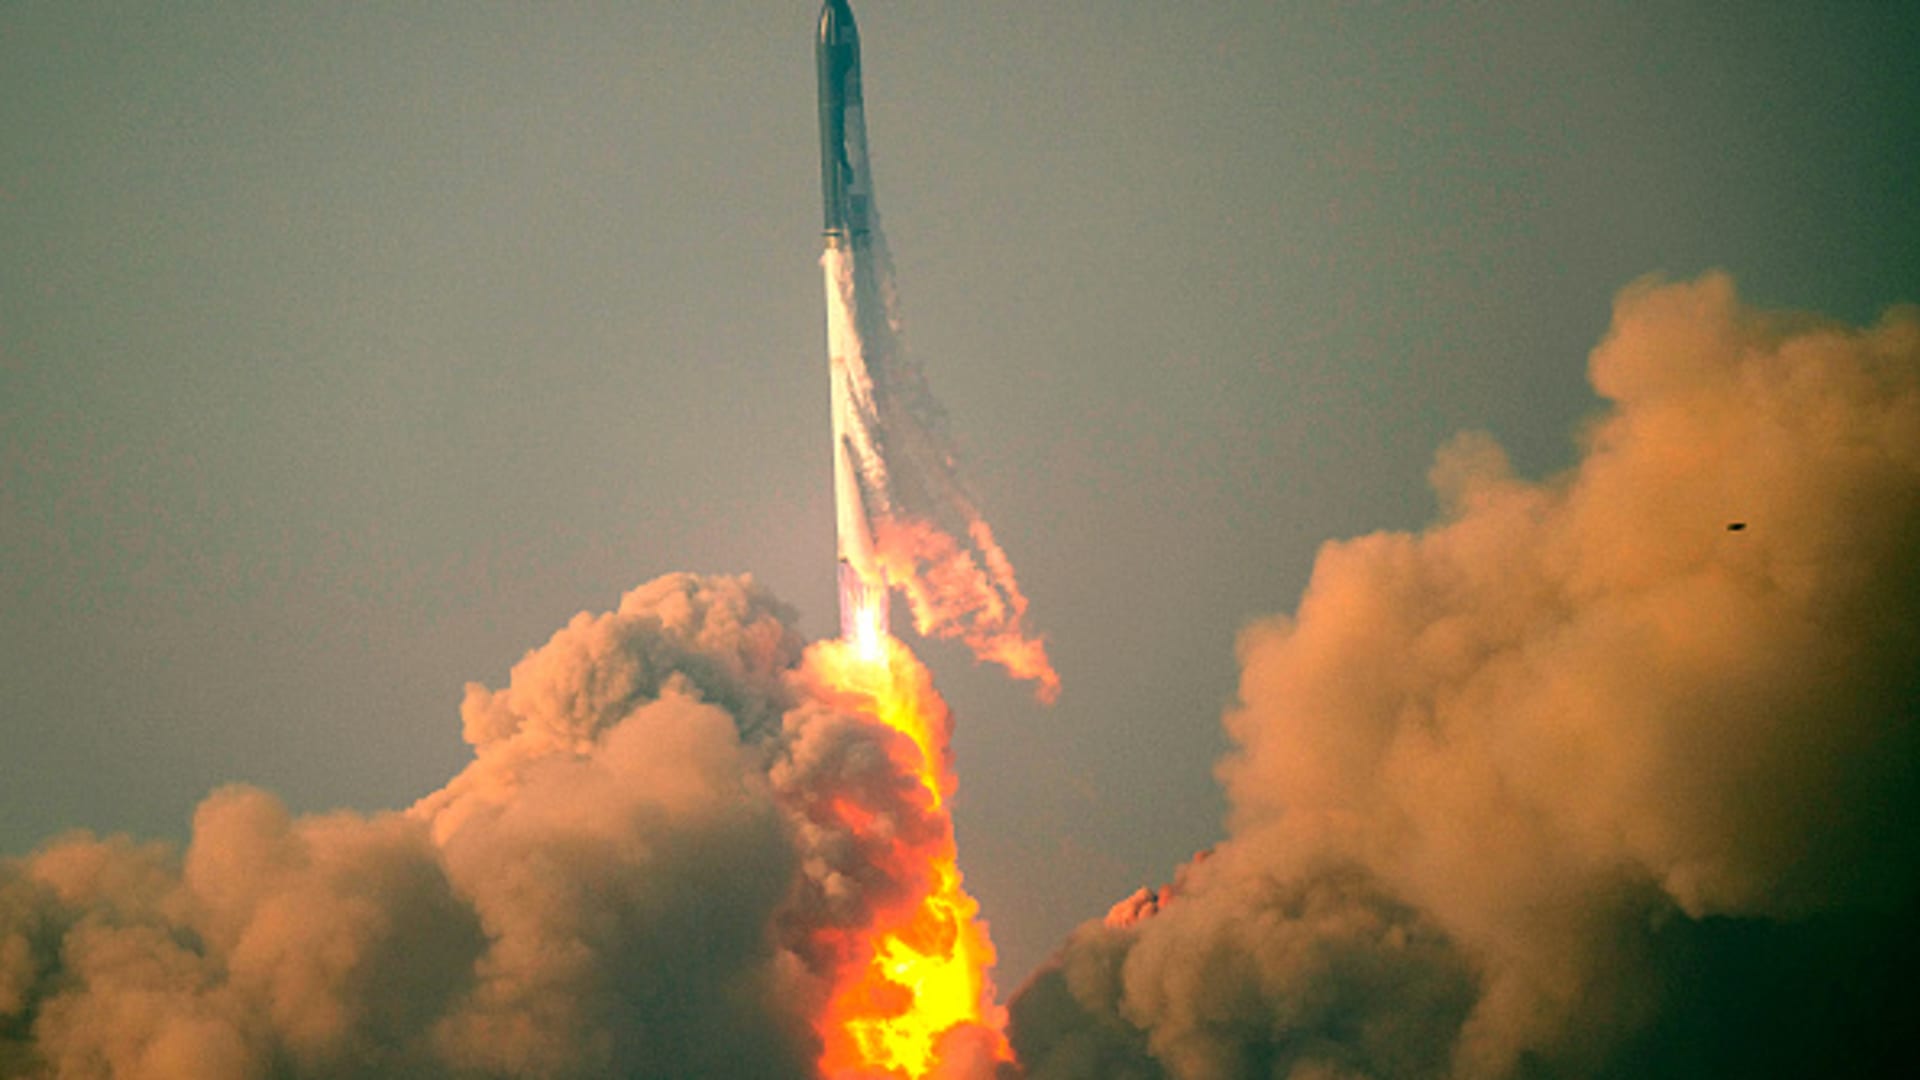 SpaceX is not yet cleared for another Starship Super Heavy test flight, FAA says